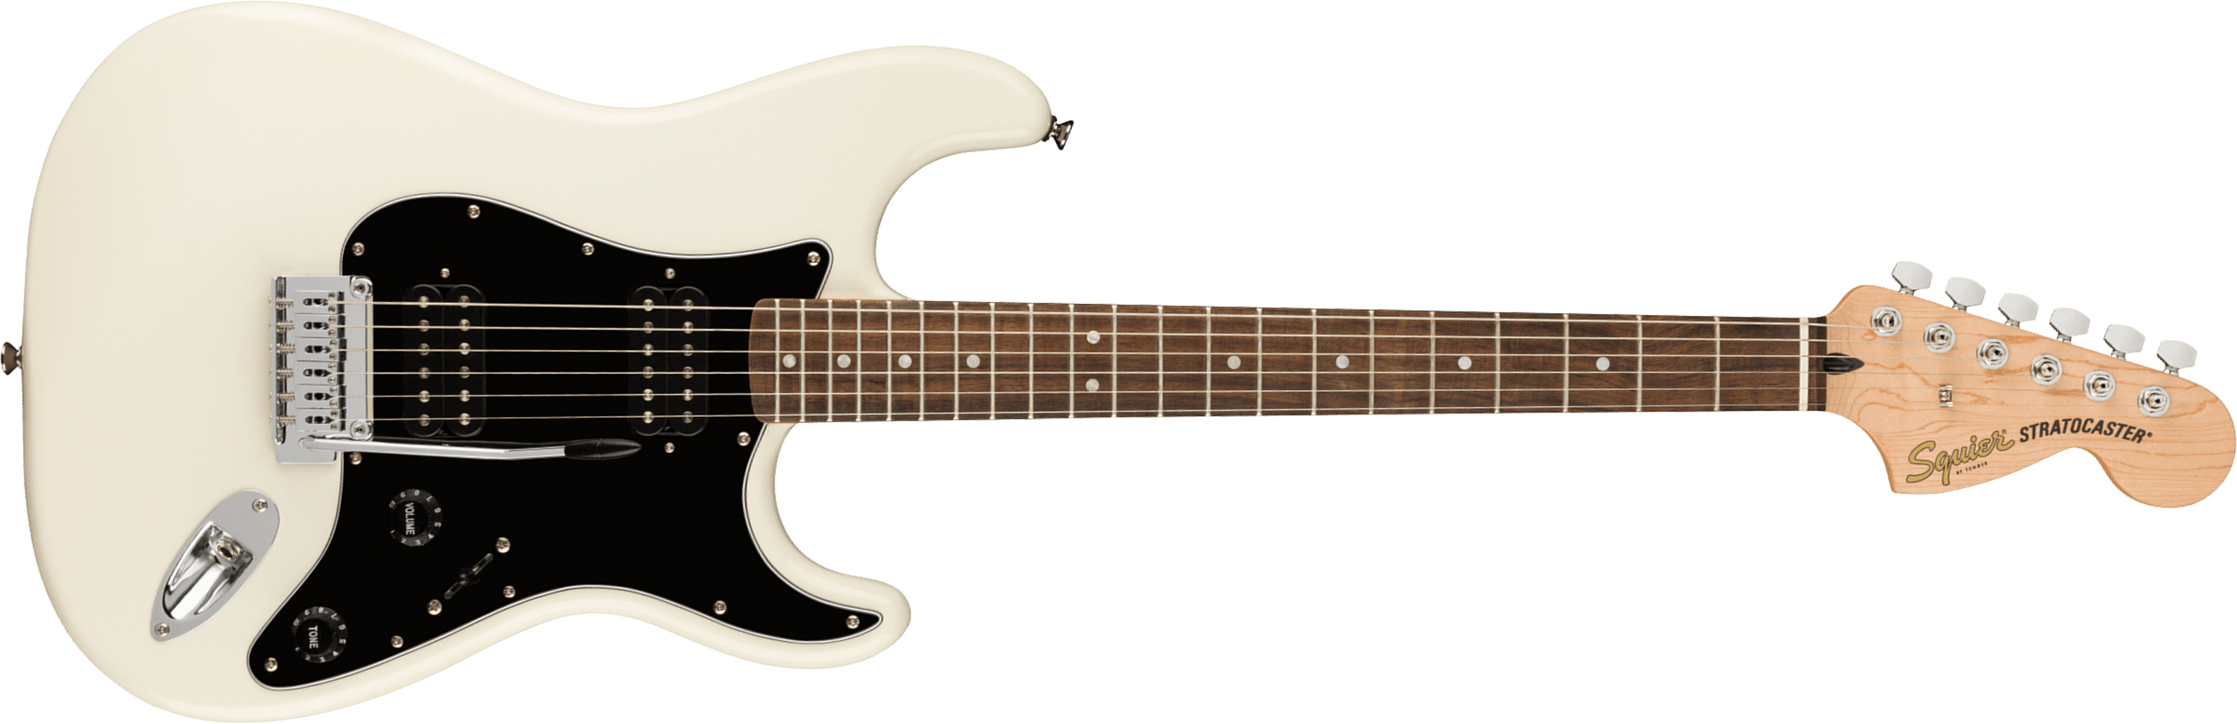 Squier Strat Affinity 2021 Hh Trem Lau - Olympic White - E-Gitarre in Str-Form - Main picture